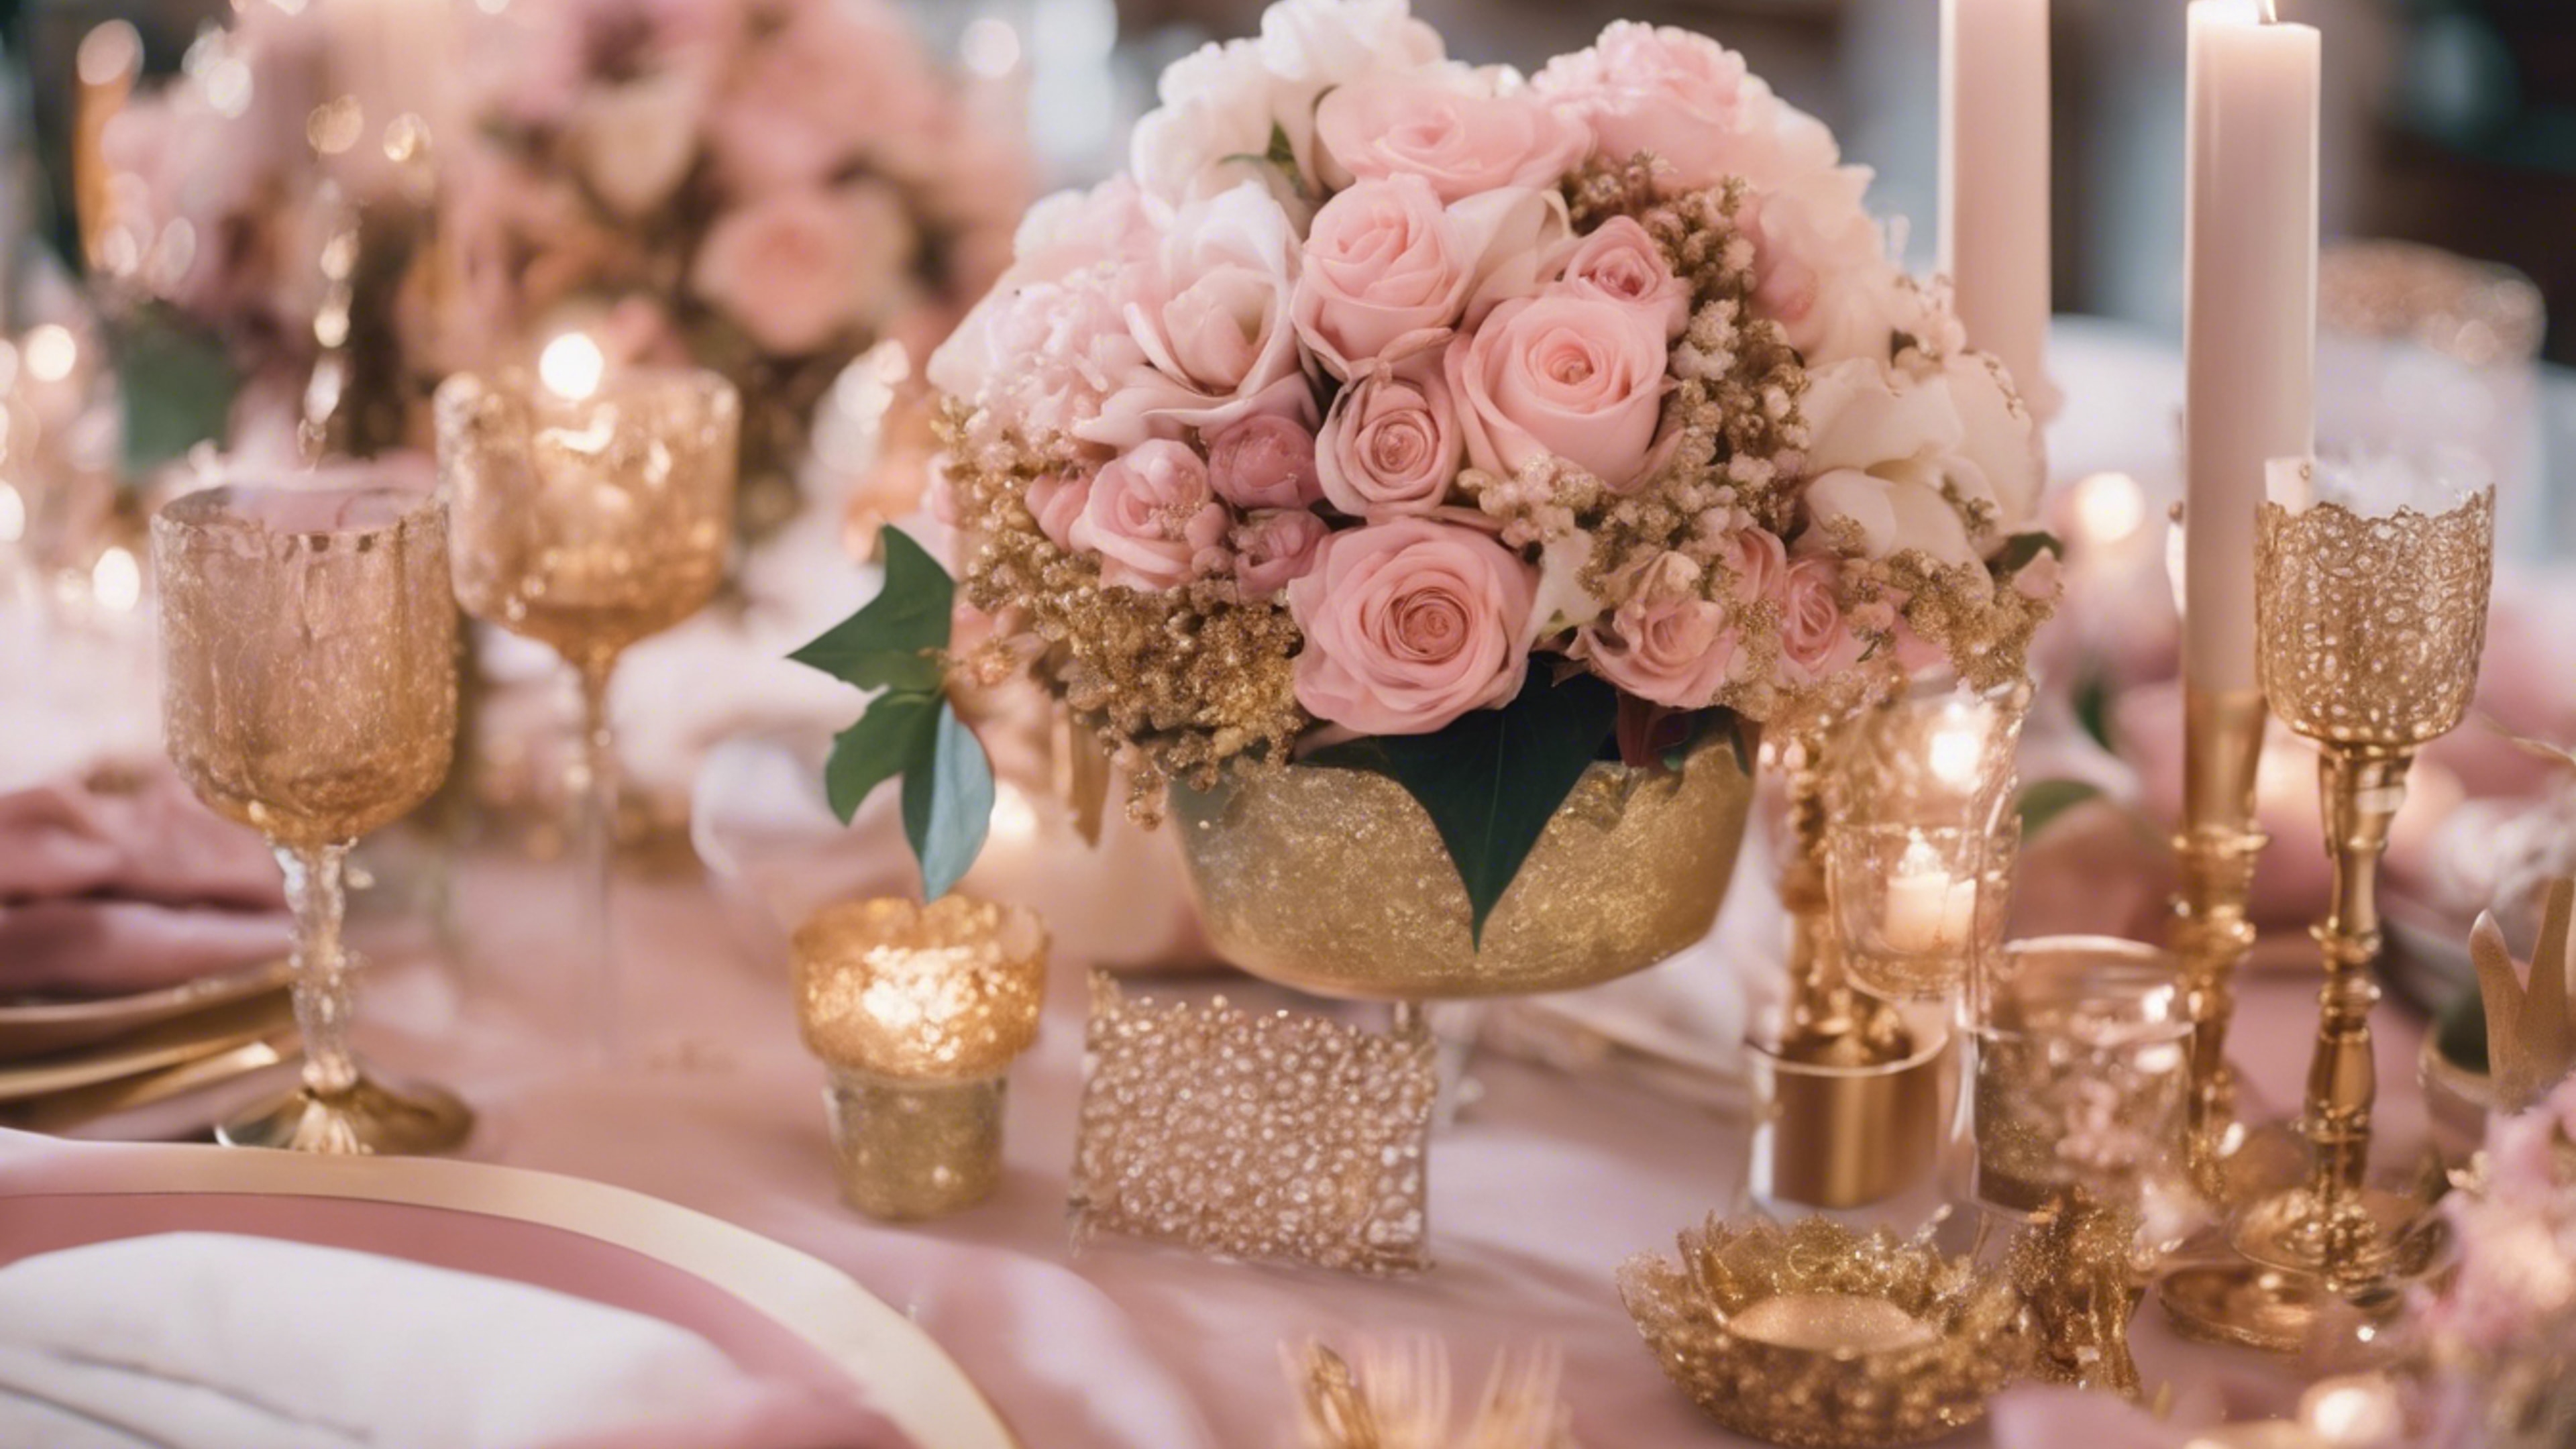 An ethereal pink and gold themed wedding decorations with flowers and metallic accents. 벽지[814998f188fb45f48f1c]